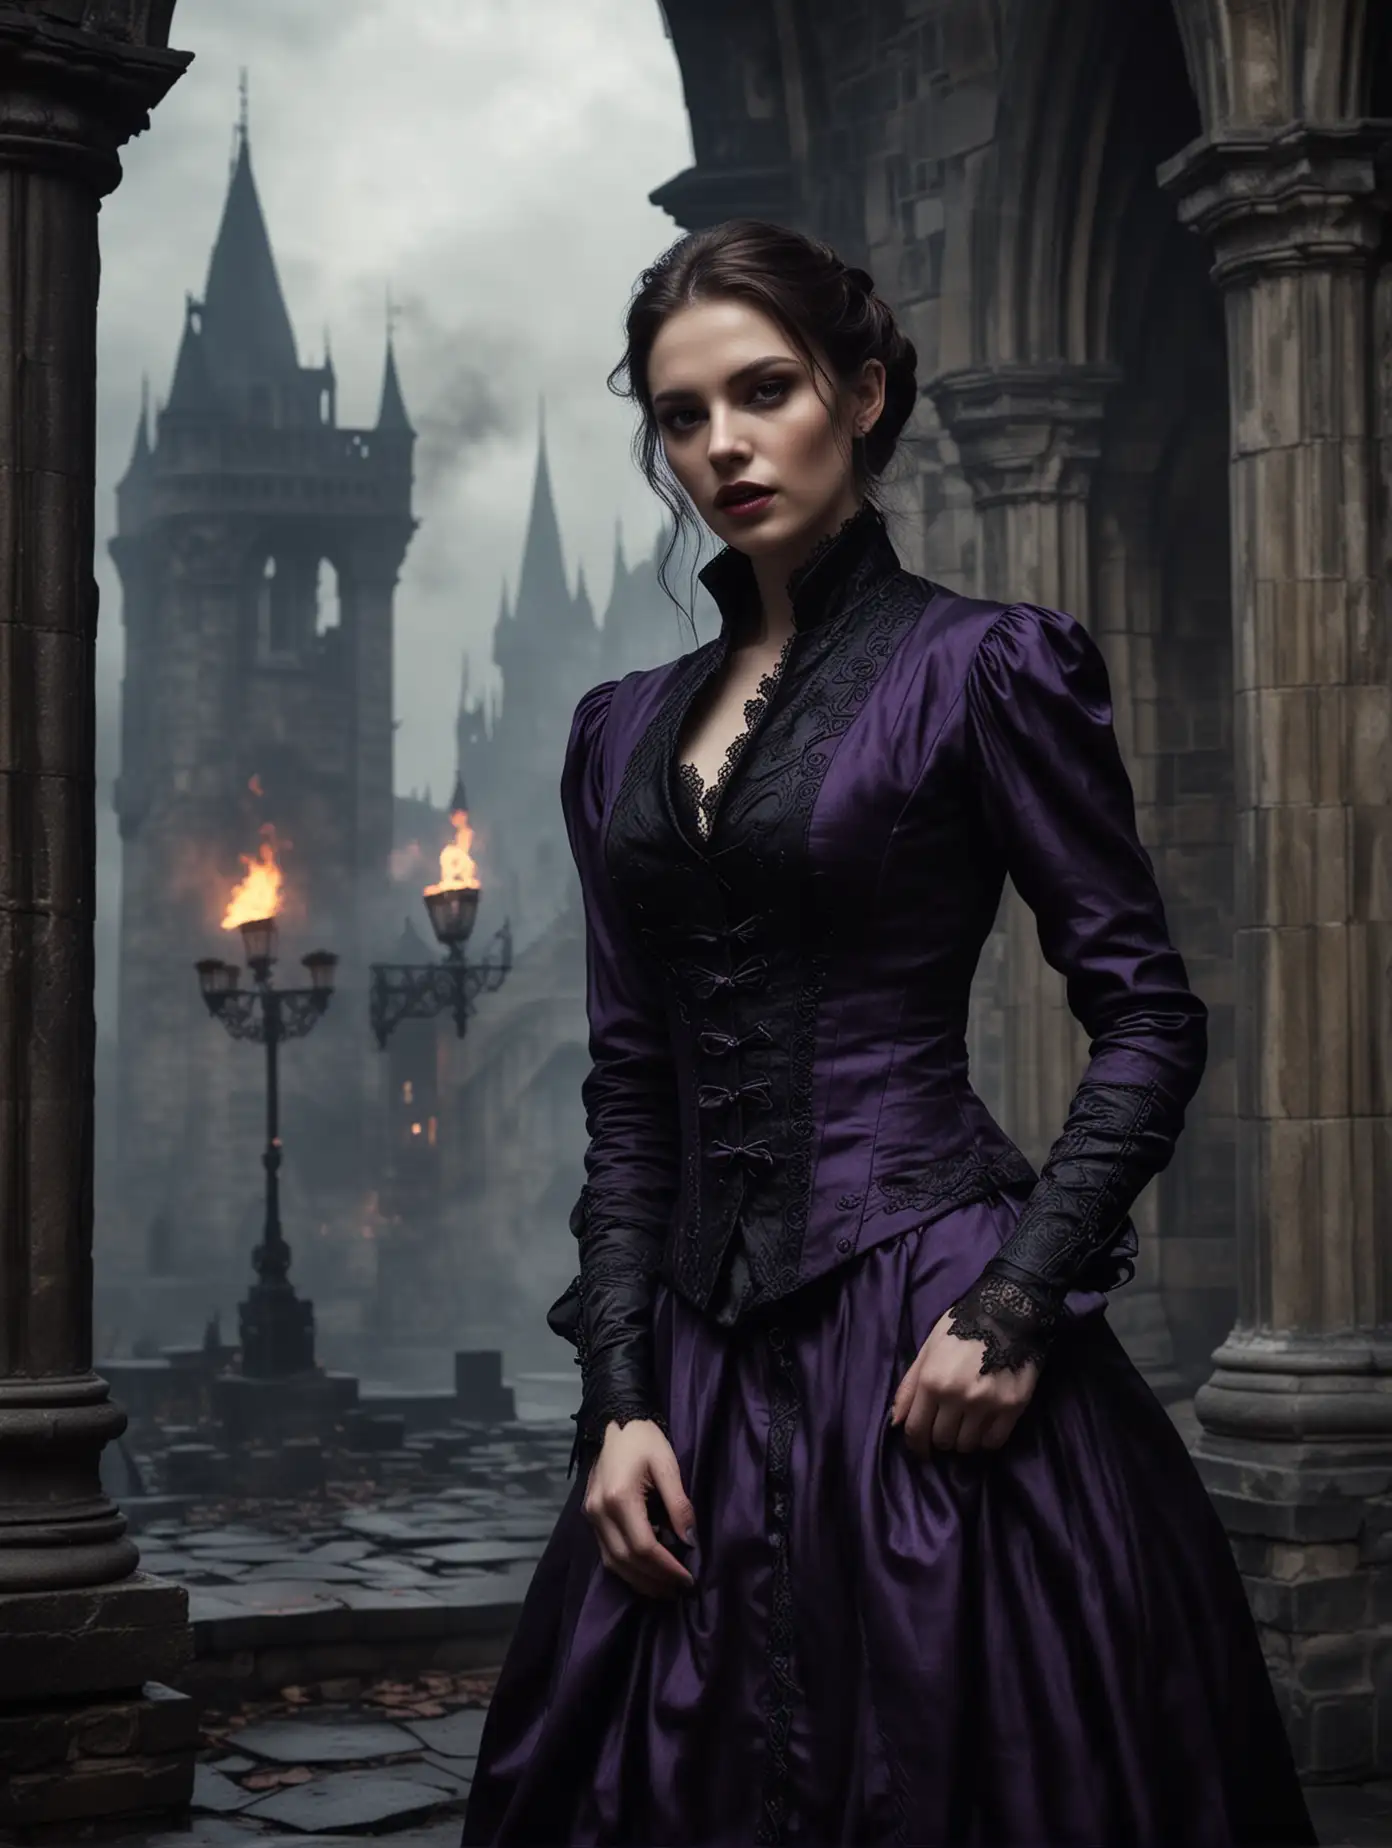 Setting: A dark Victorian castle with Gothic details and a slight mist around.Character: A vampire woman appearing to be 30 years old, dressed in an elegant Victorian waistcoat and other period clothing, with a seductive and mysterious air.Positioning: The vampire is positioned slightly tilted towards the camera, with a seductive gaze and a faint smile. He is partially shrouded in shadows, suggesting an air of mystery.Flame elements: There are flame running down the vampire's body and scattered on the castle floor, adding a dark touch.Predominant colors: Predominantly violet, with dark tones and deep shadows to create a gloomy and sinister atmosphere.